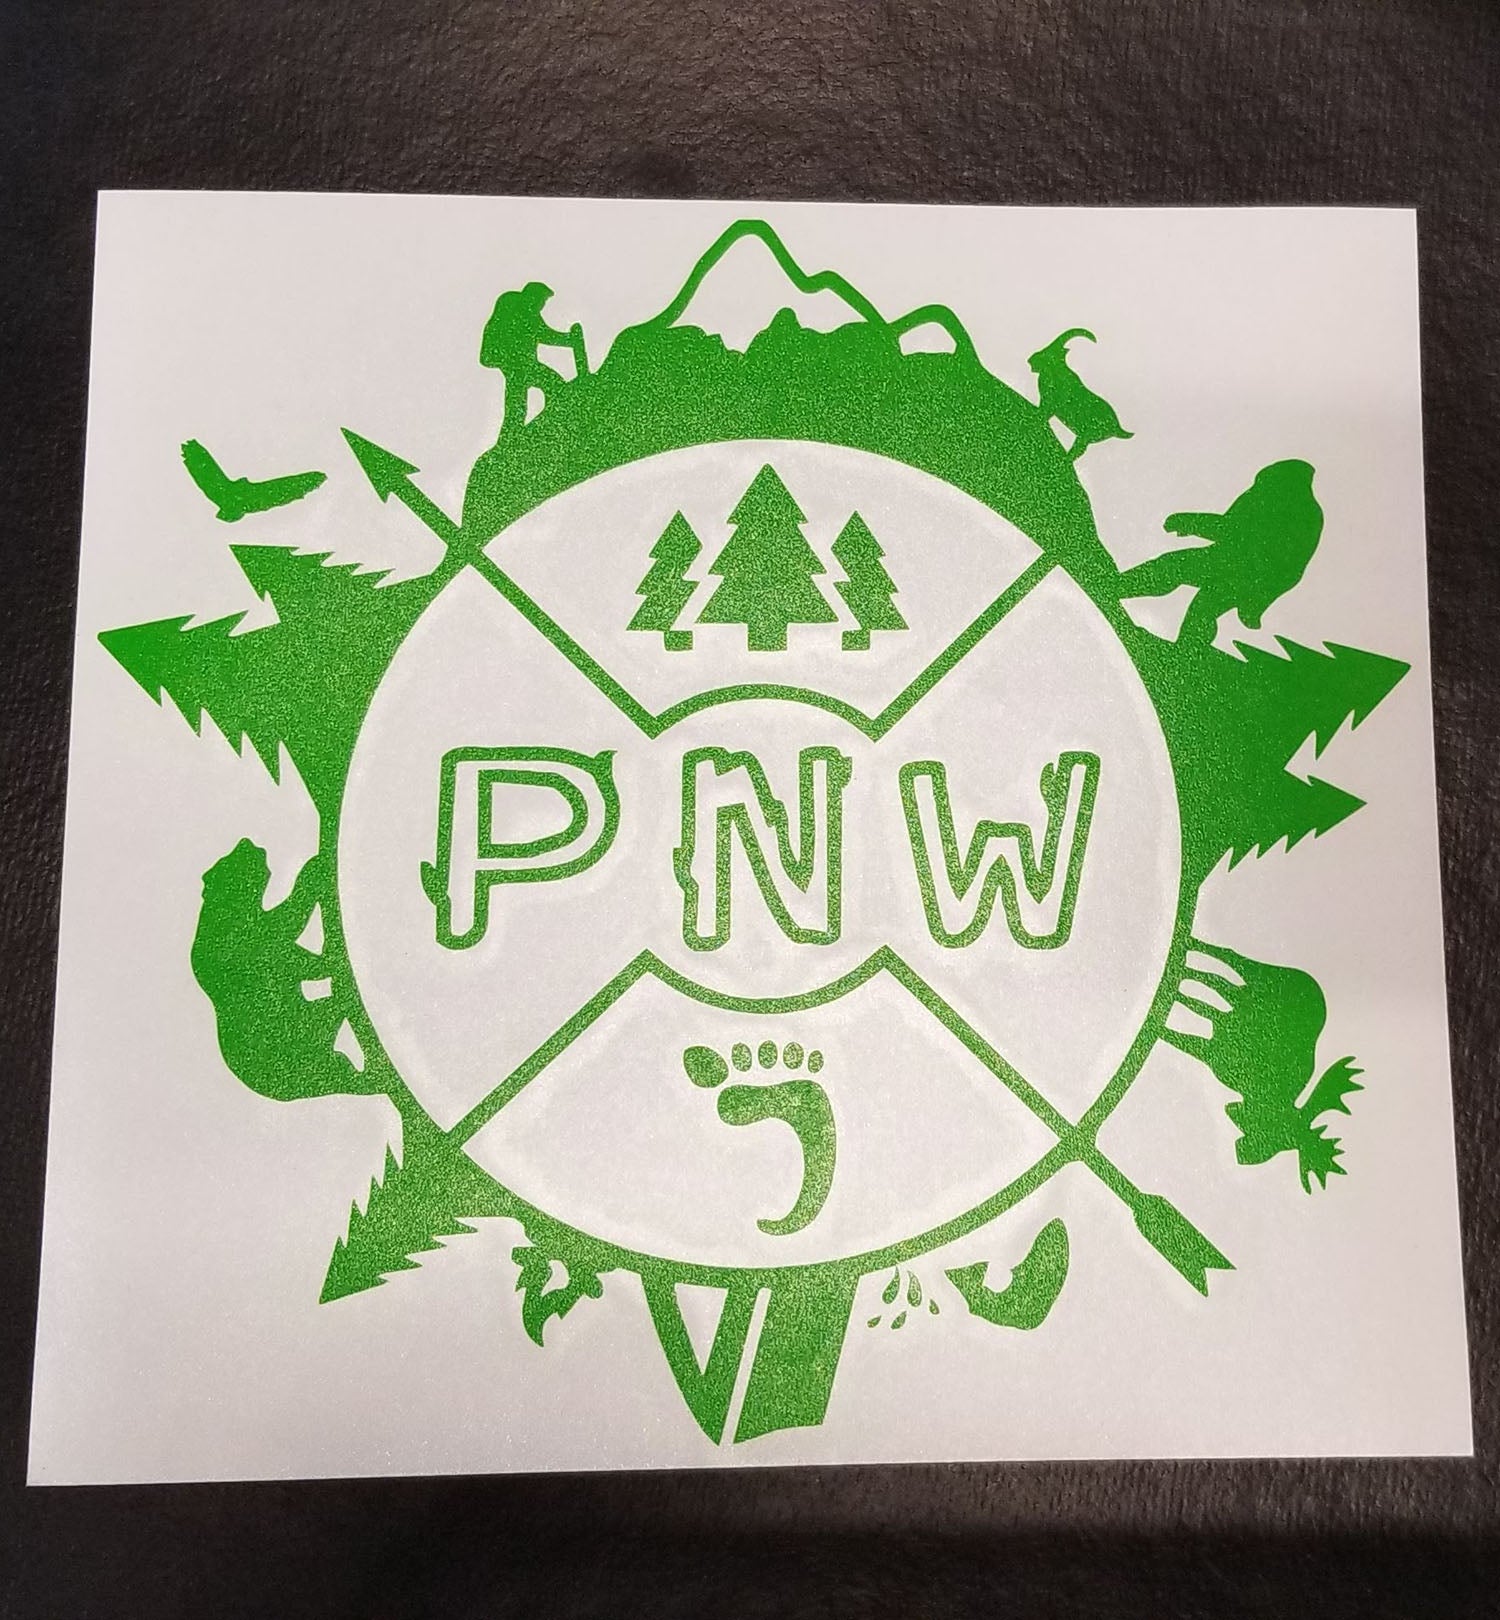 Around the PNW - Decal - Green - 8 Inch